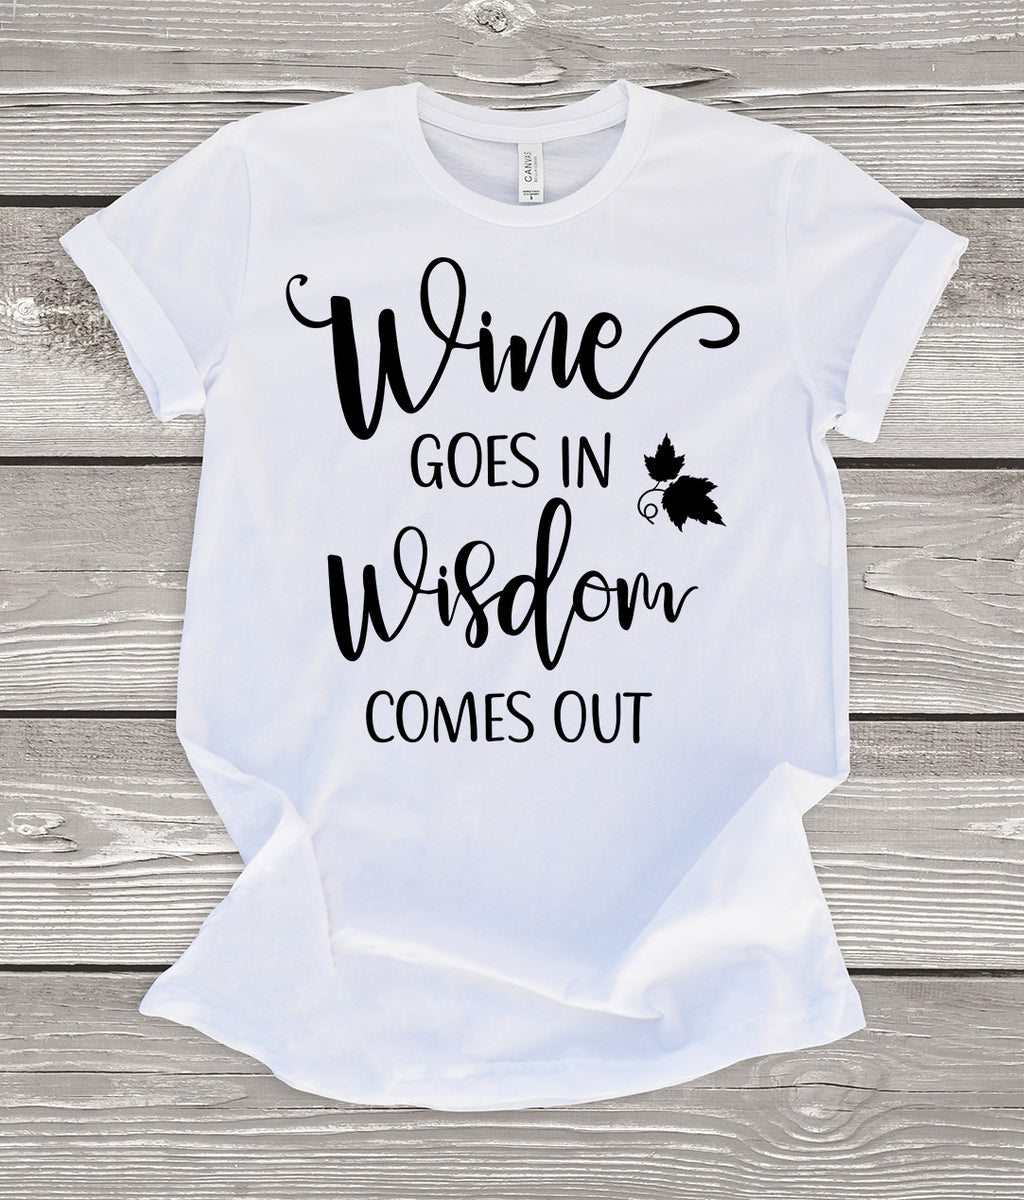 Wine Goes In Wisdom Comes Out T-Shirt